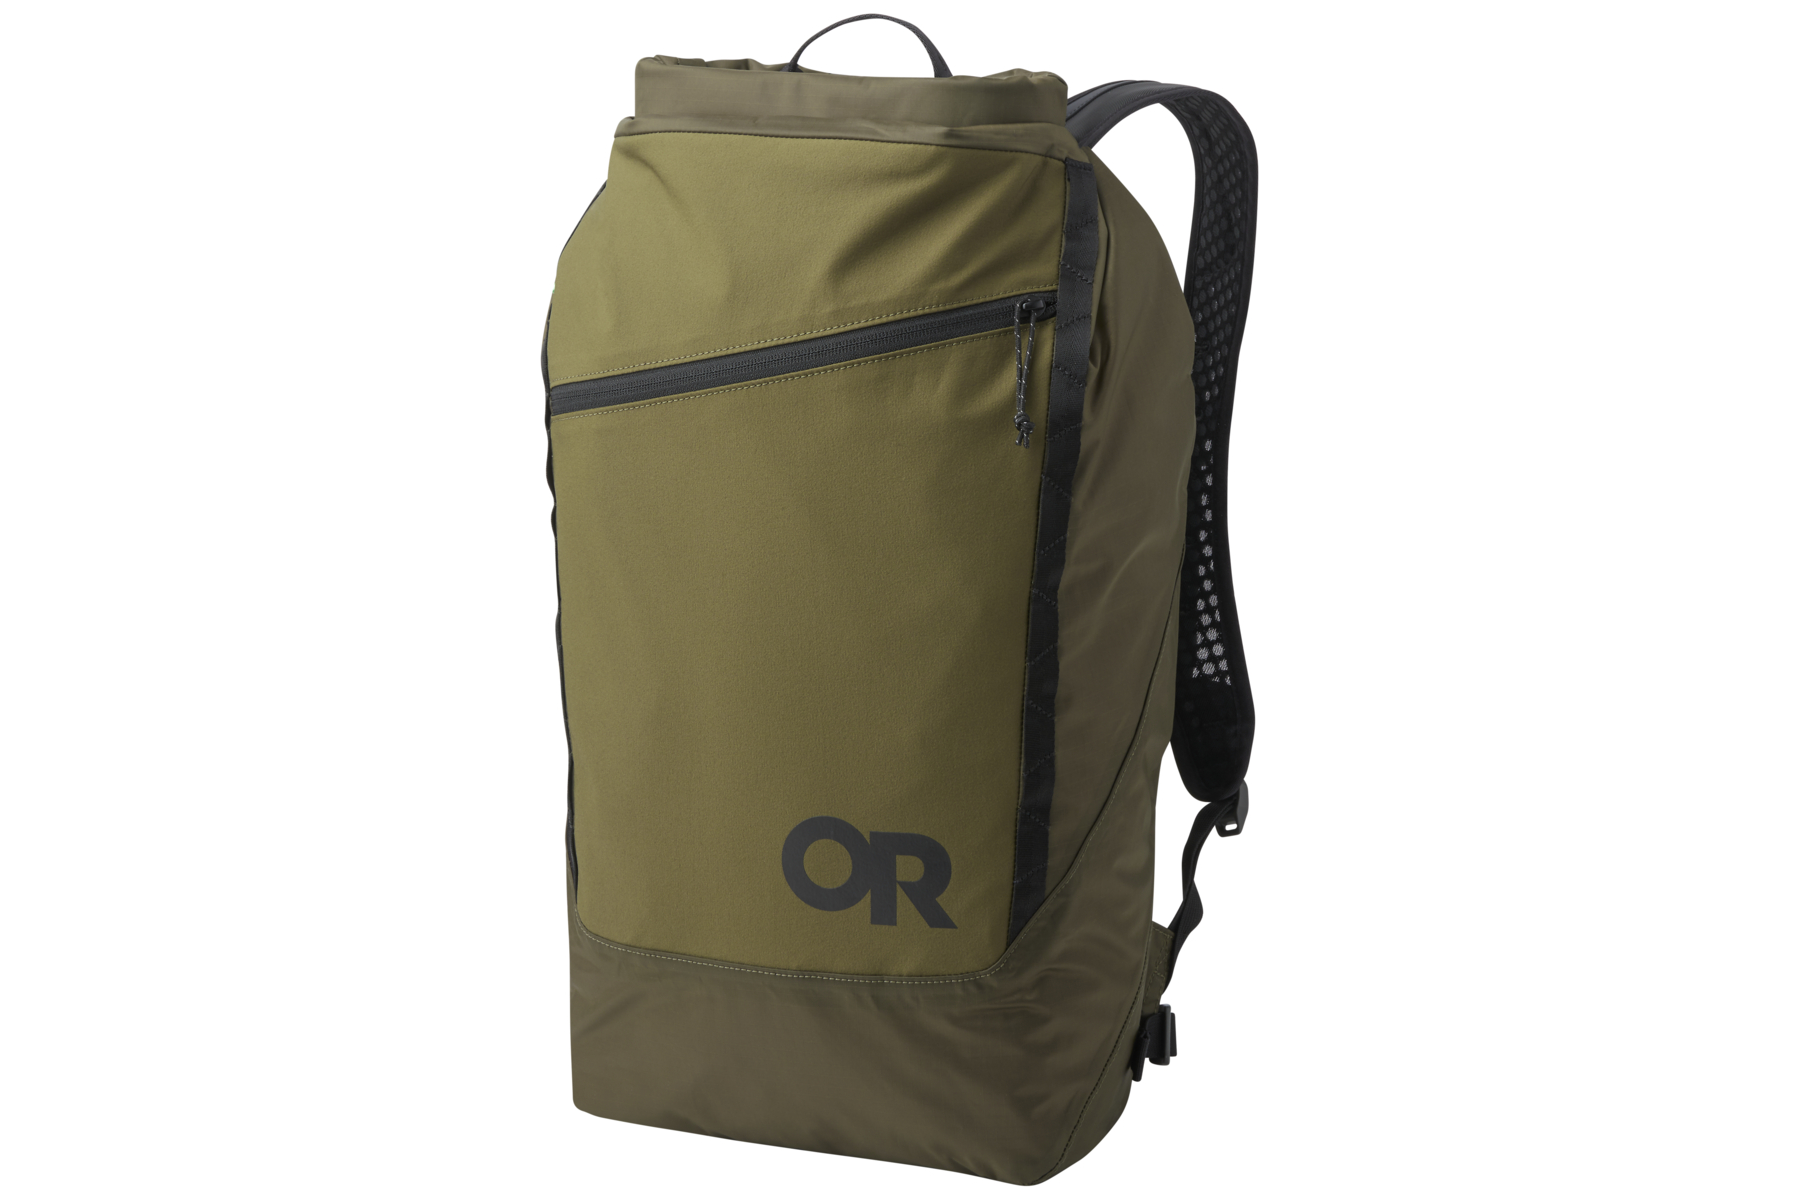 Outdoor Research CarryOut Dry Pack